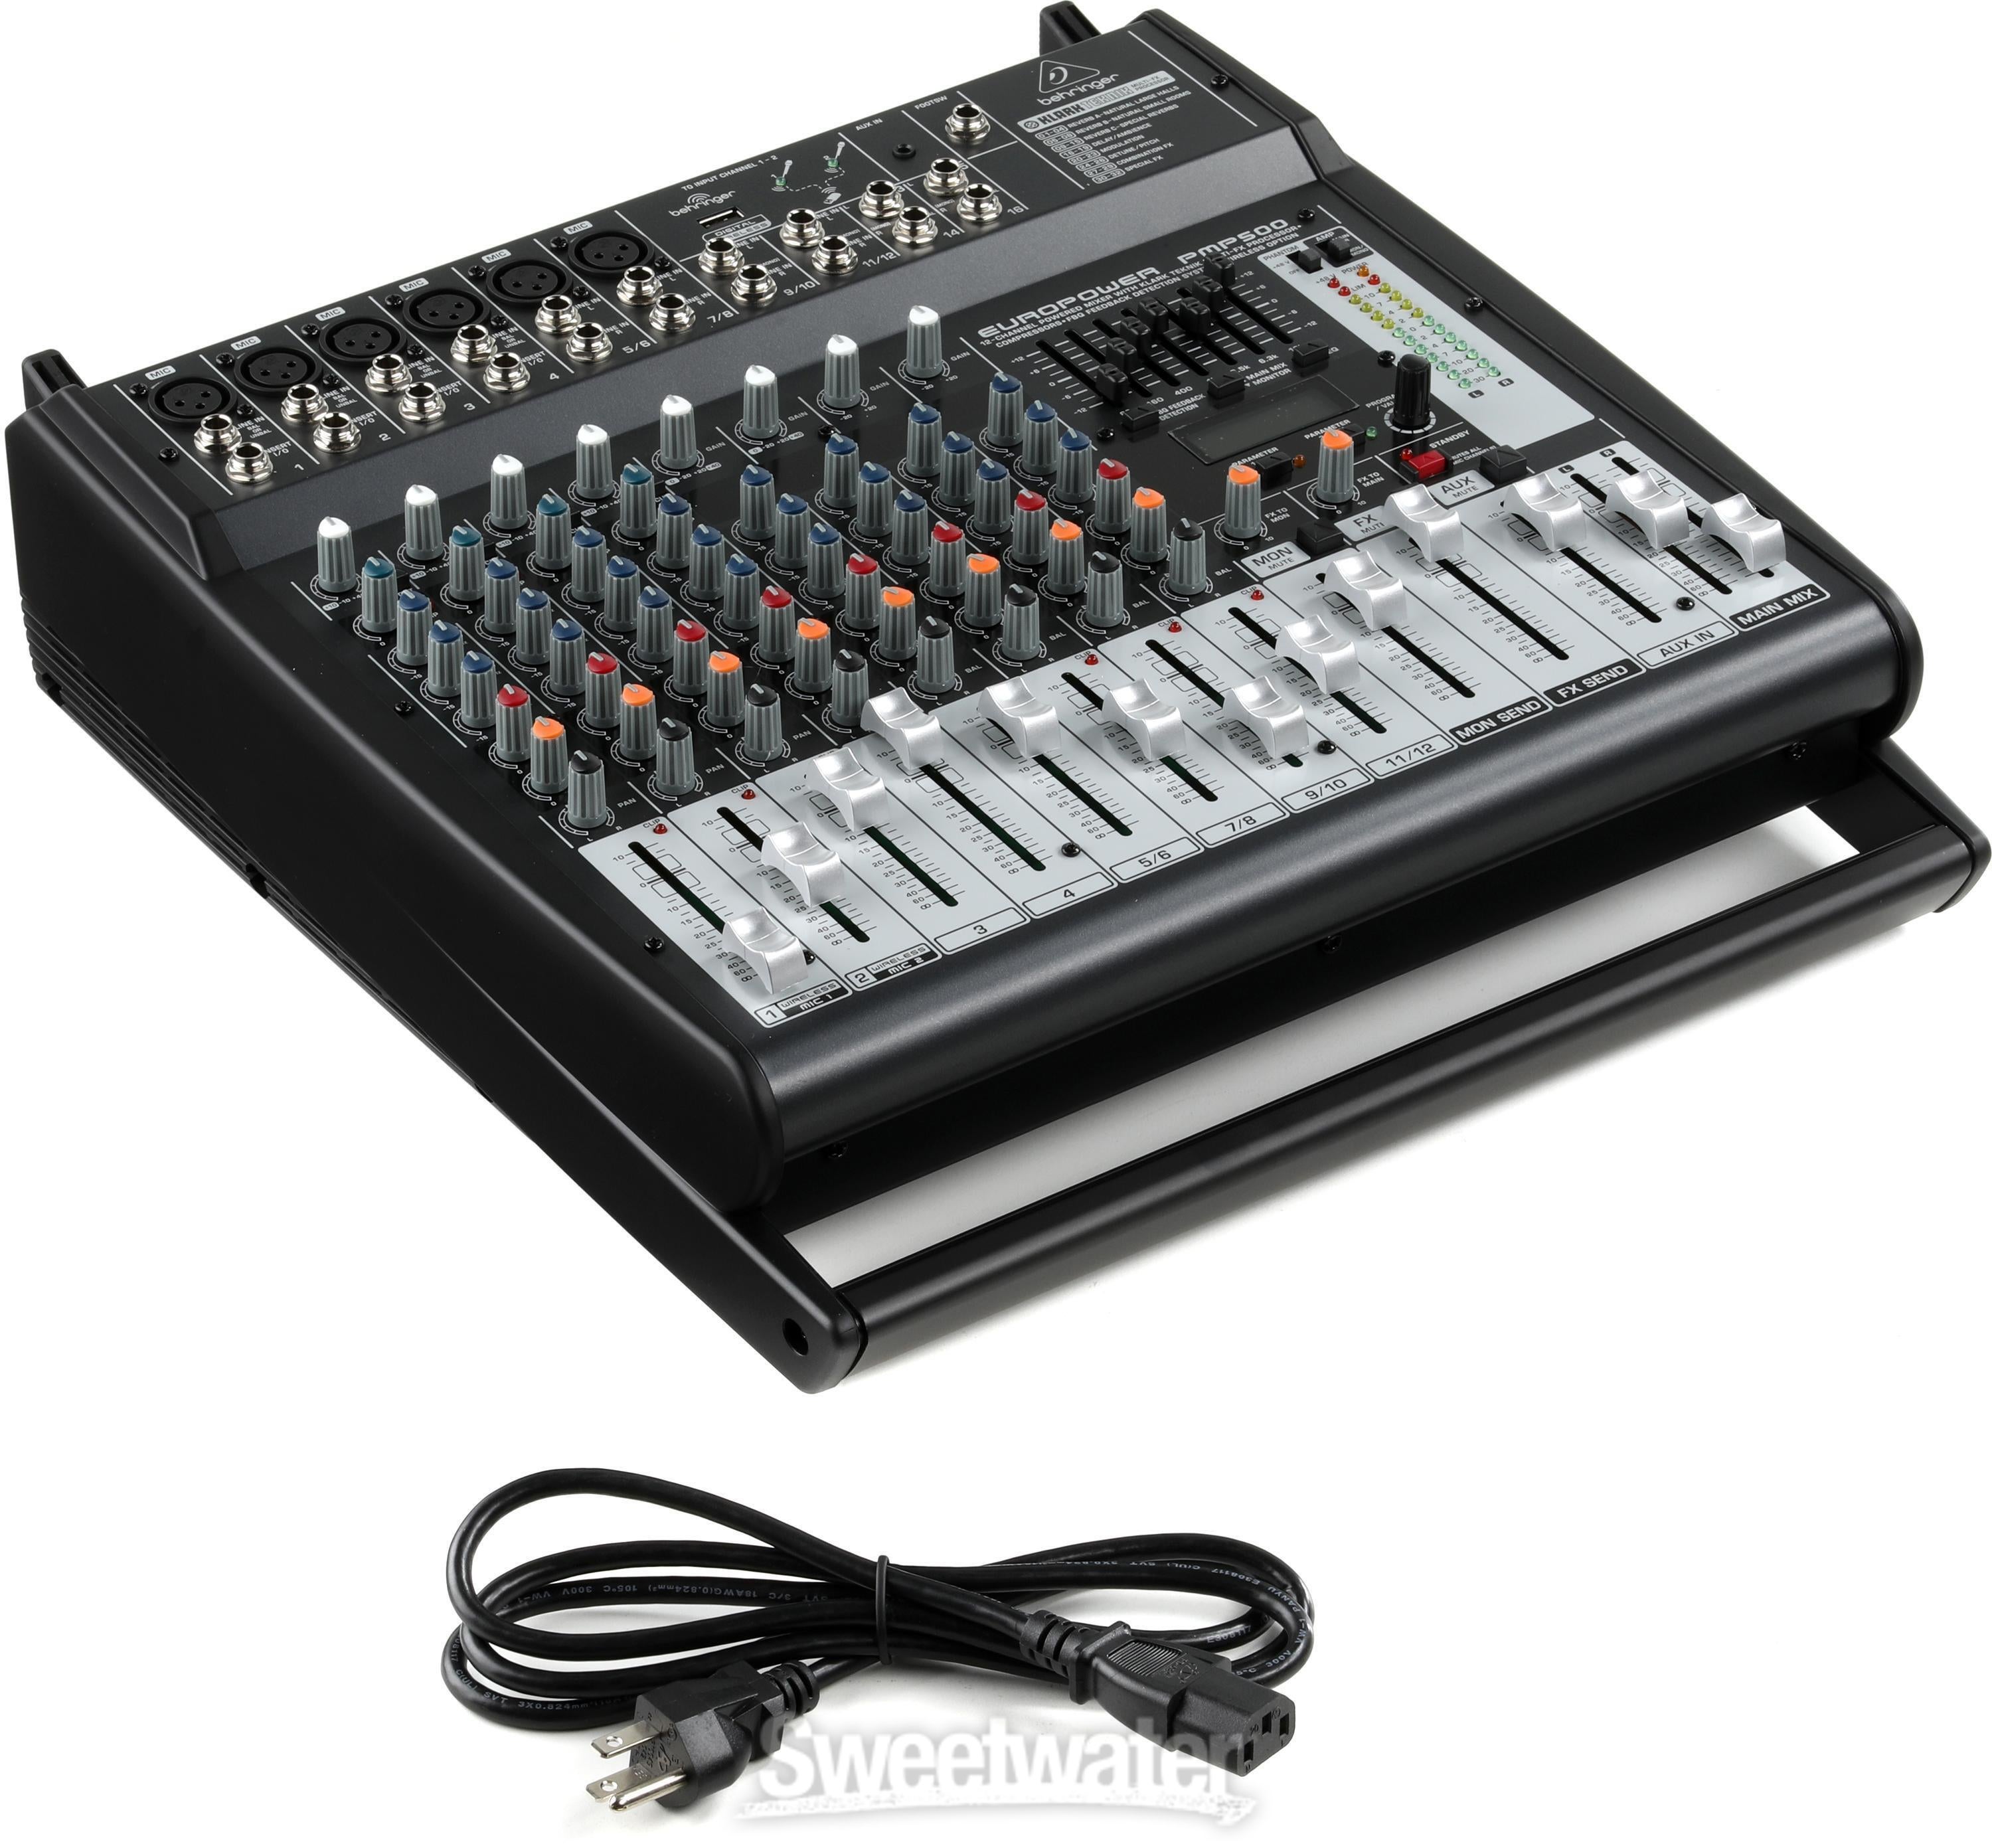 Behringer Europower PMP500 12-channel 500W Powered Mixer | Sweetwater